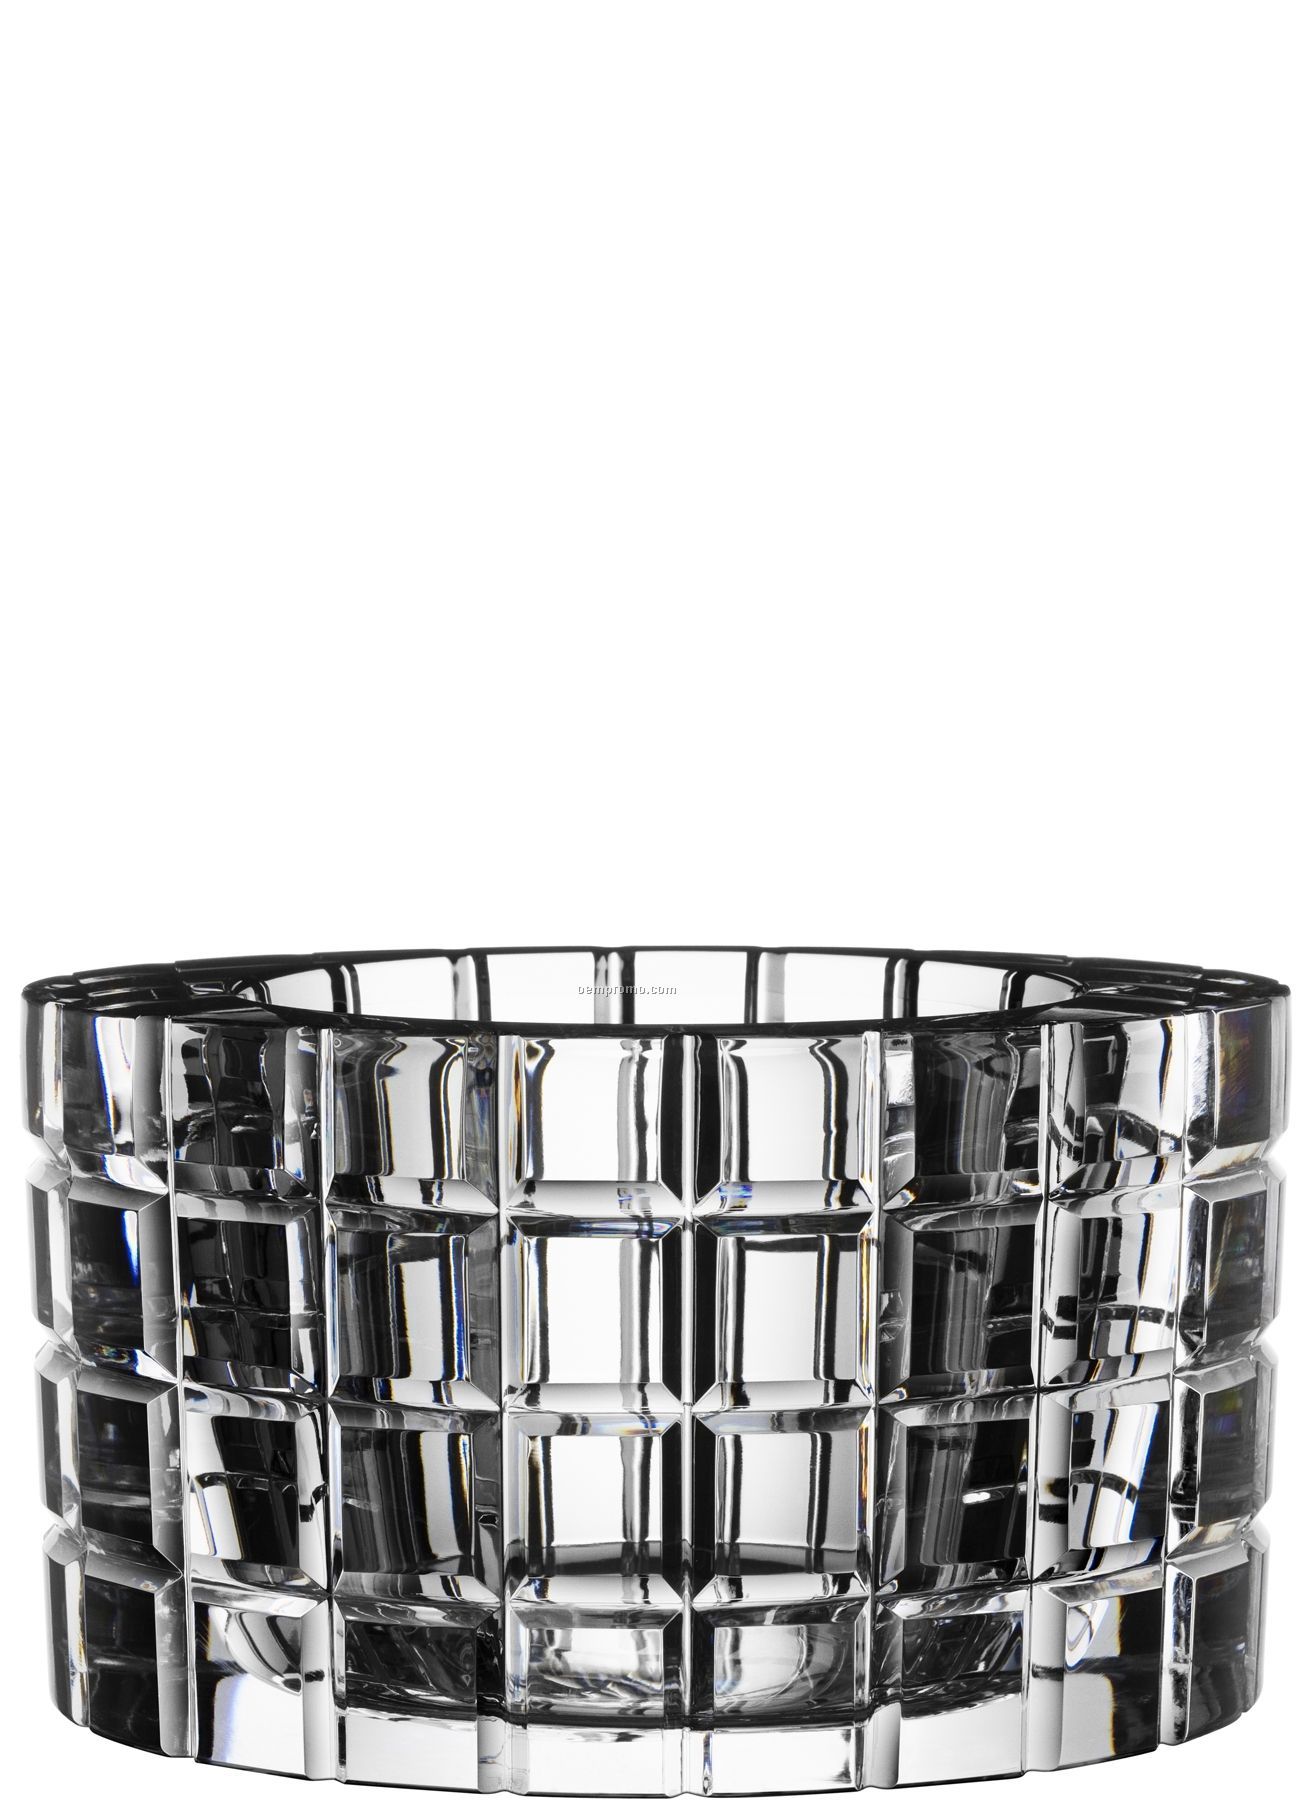 Move Crystal Bowl W/ Checkered Pattern By Jan Johansson